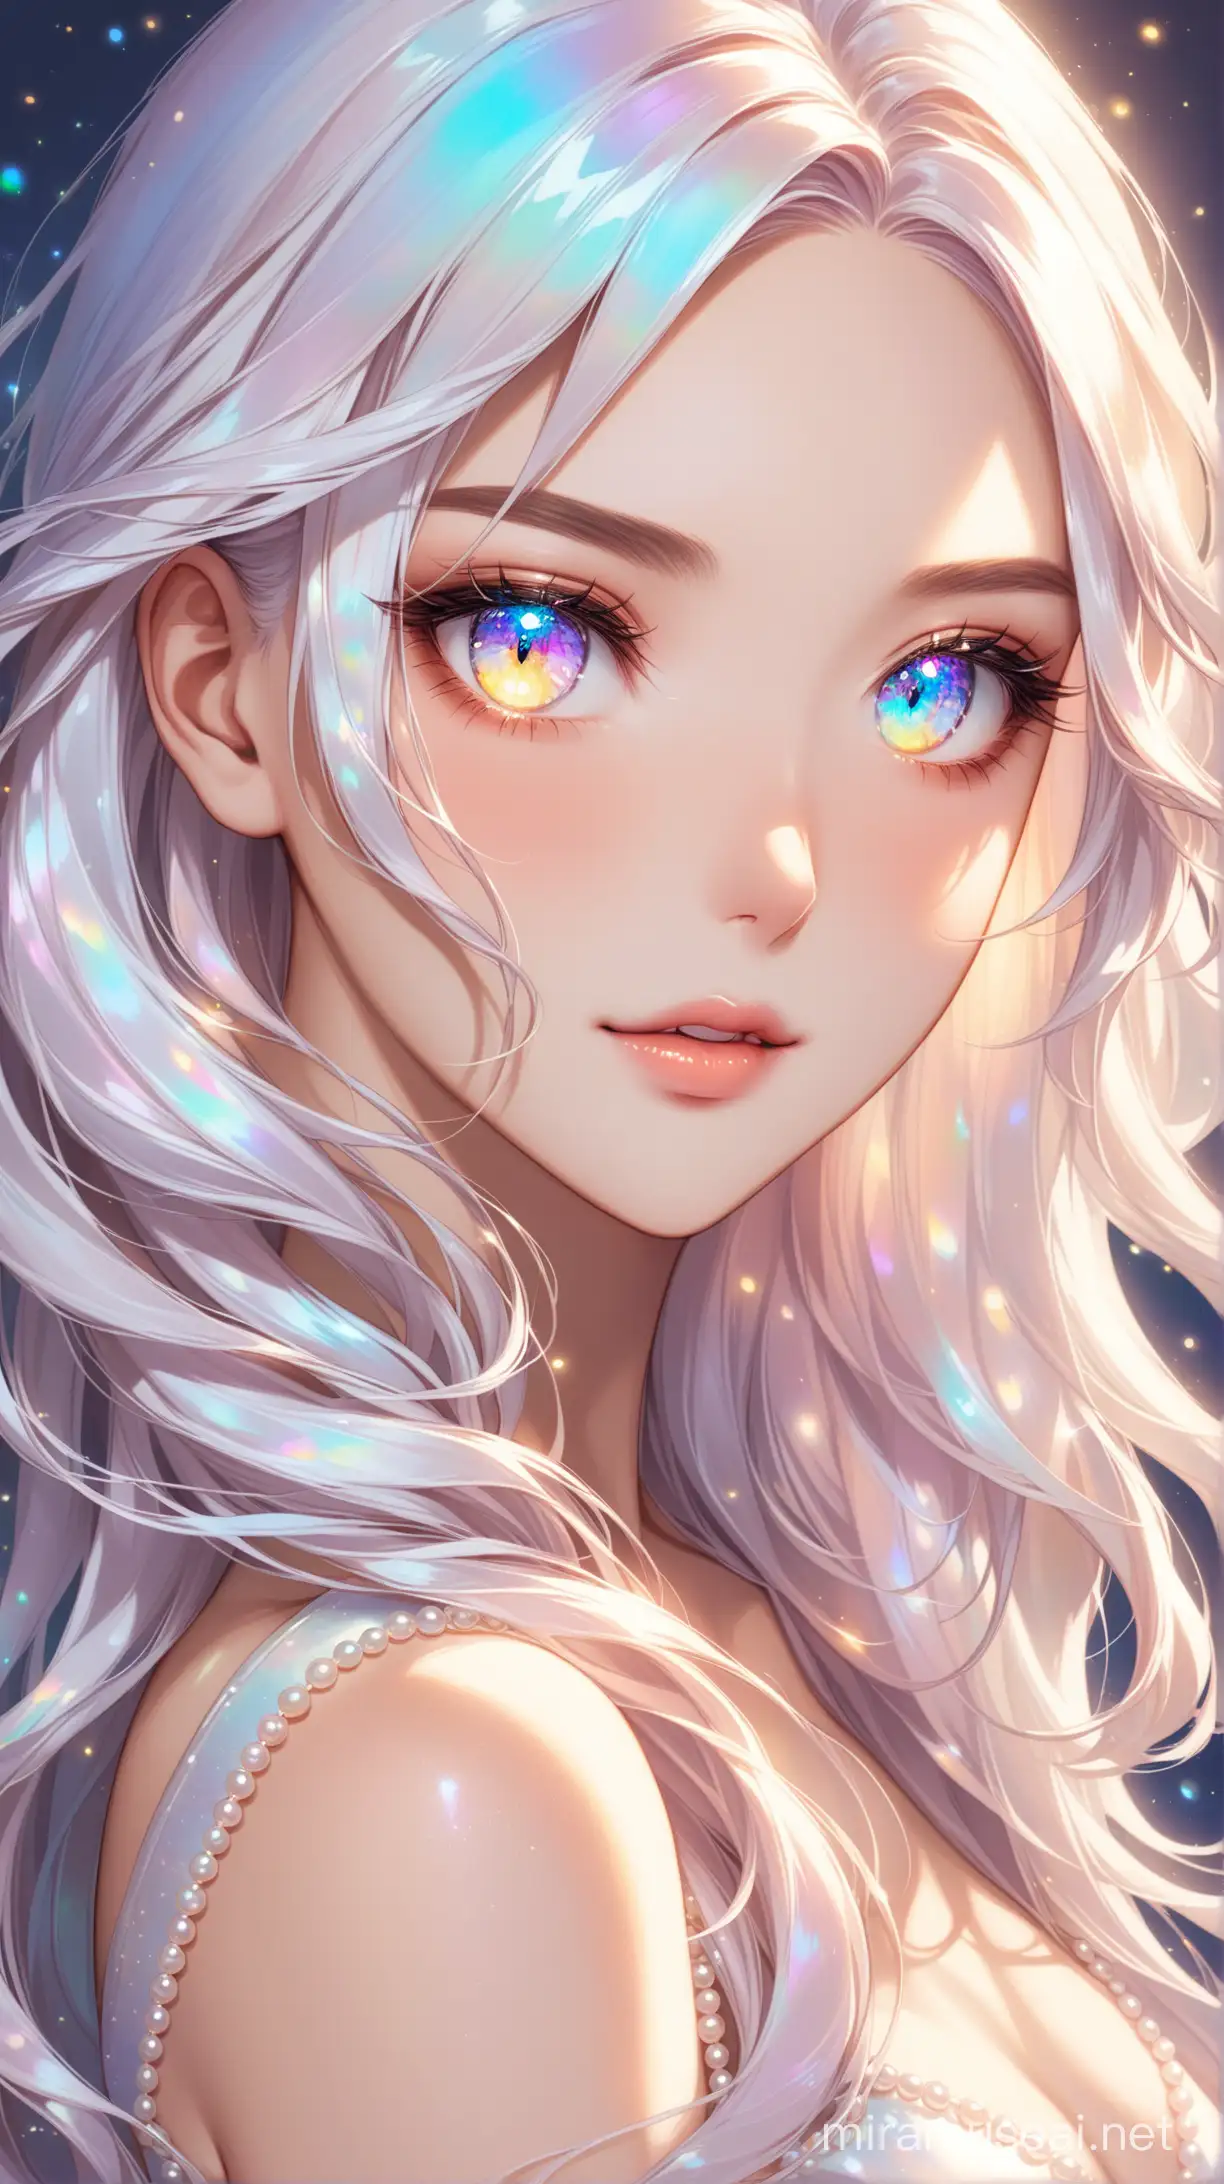 Beautiful woman with pearlescent hair and opalescent eyes